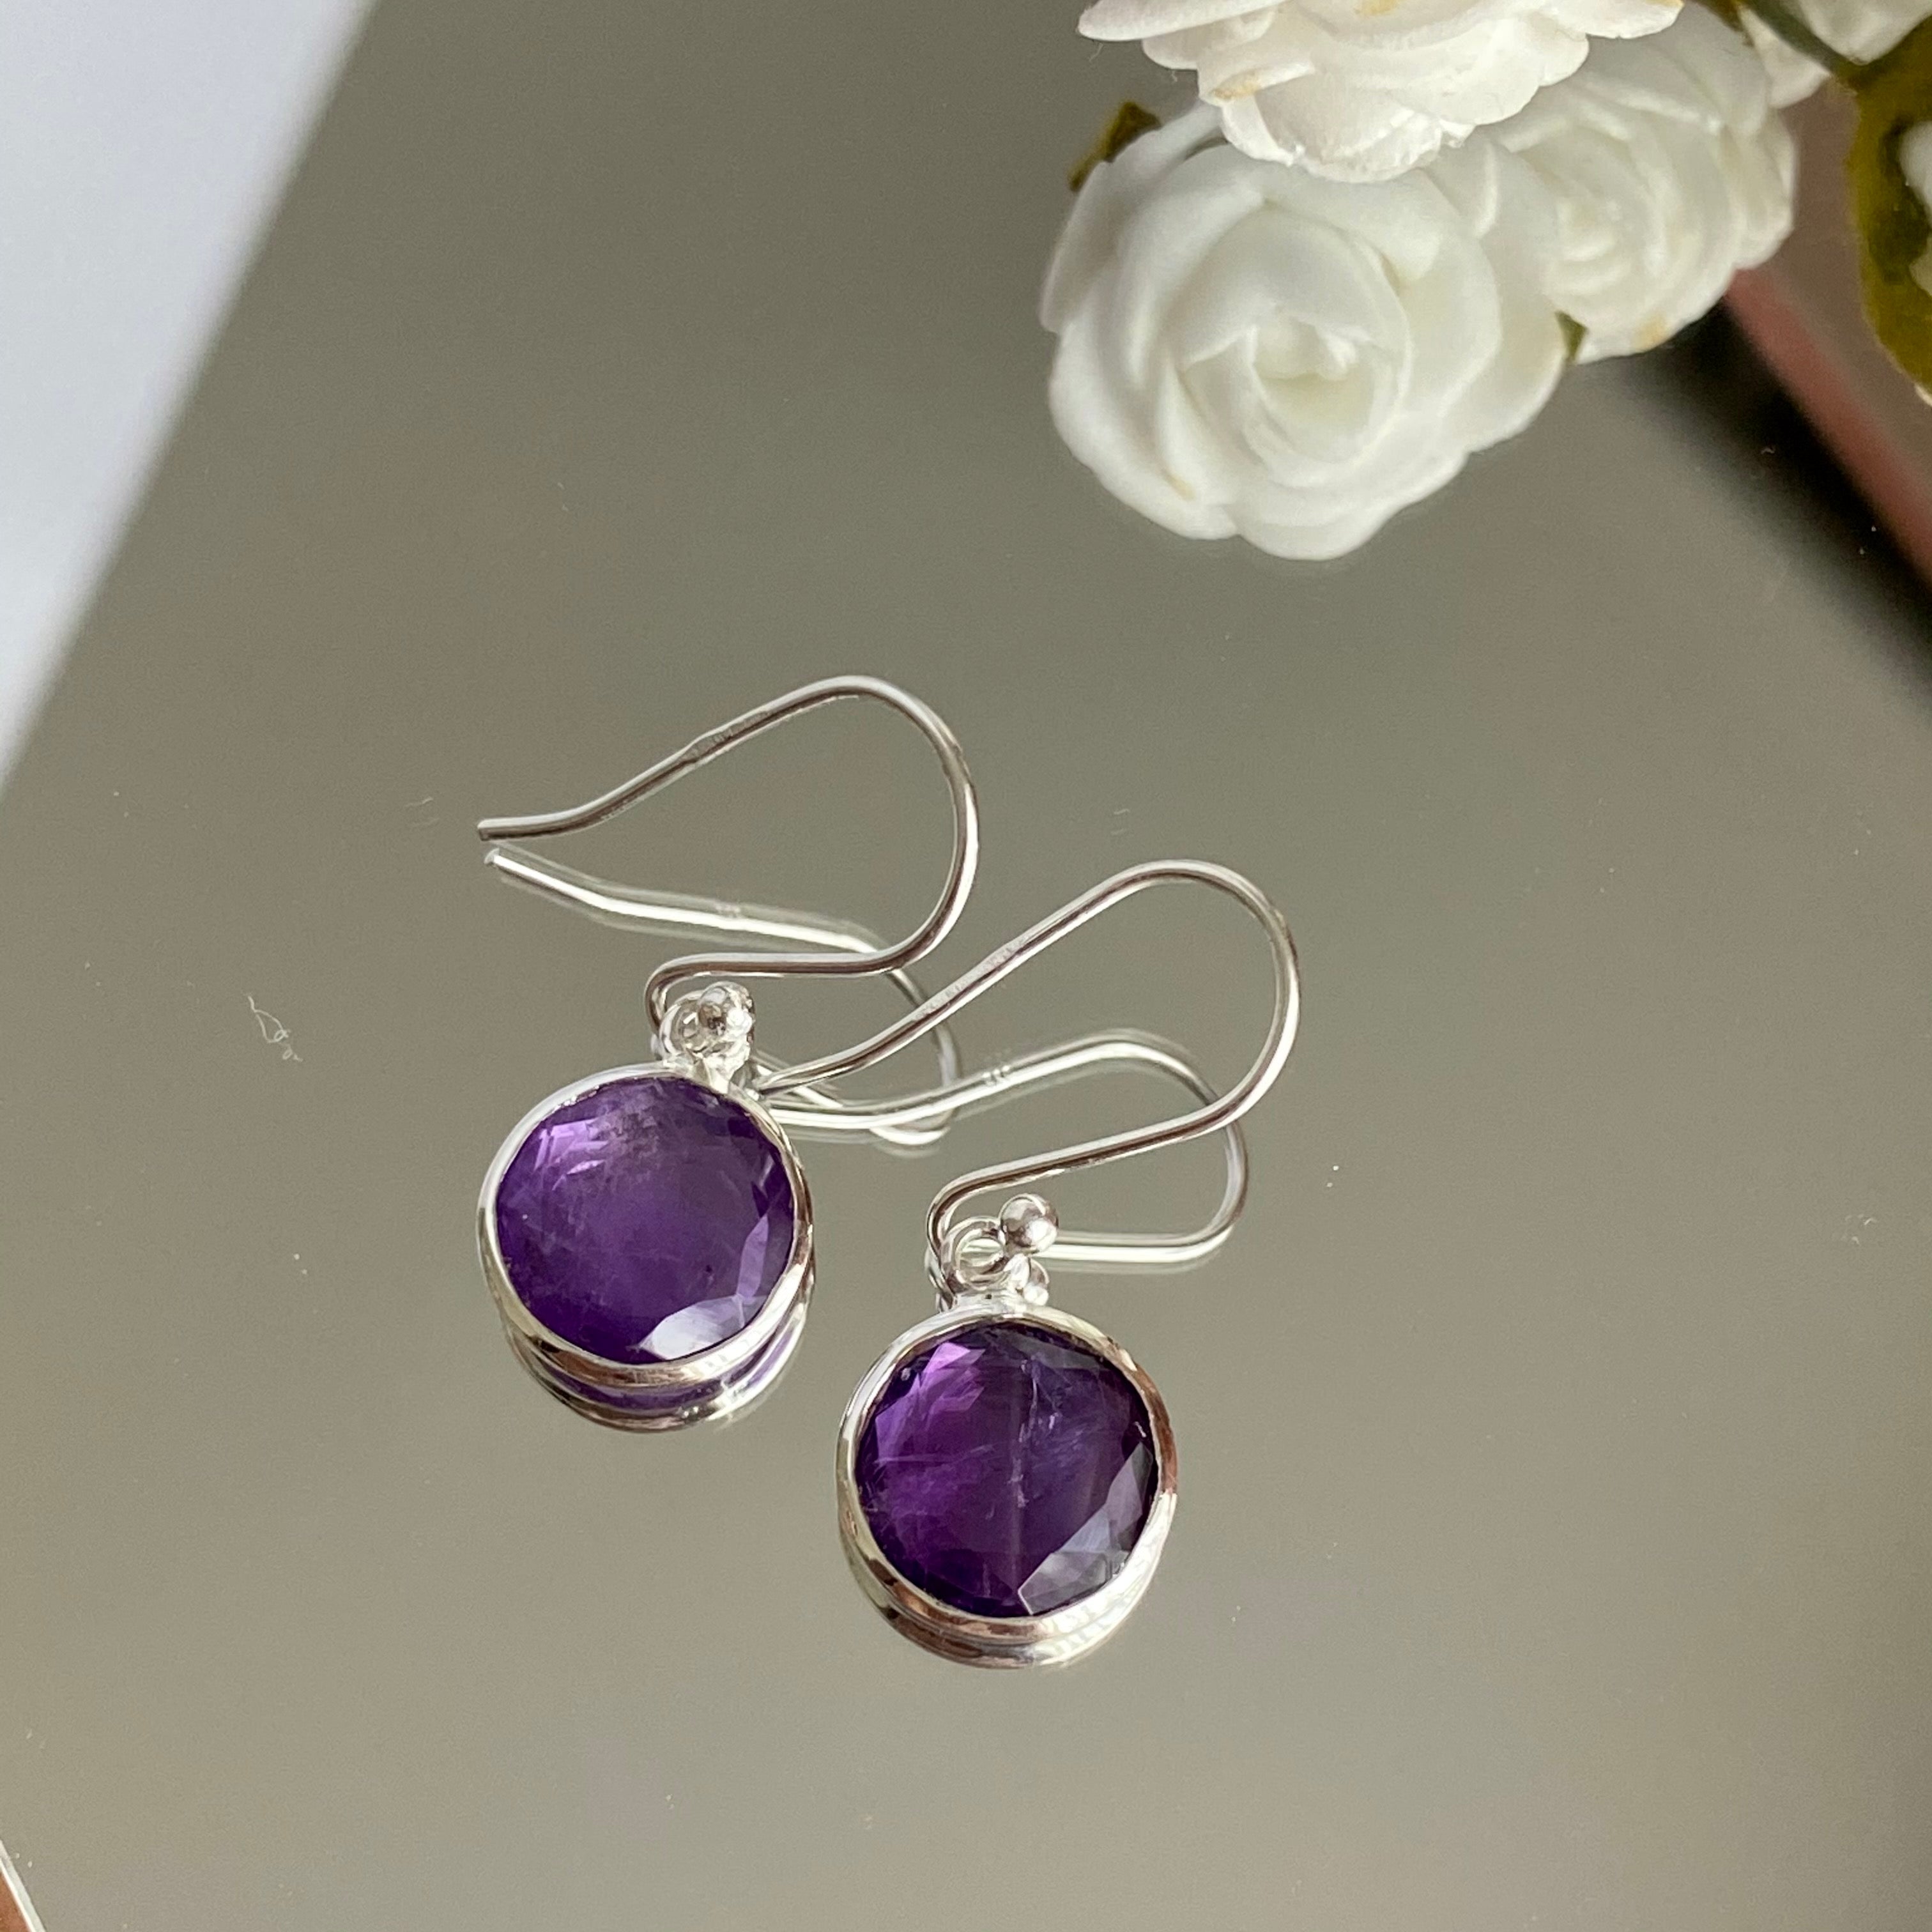 Amethyst Sterling Silver Earrings with a Round Faceted Gemstone Drop